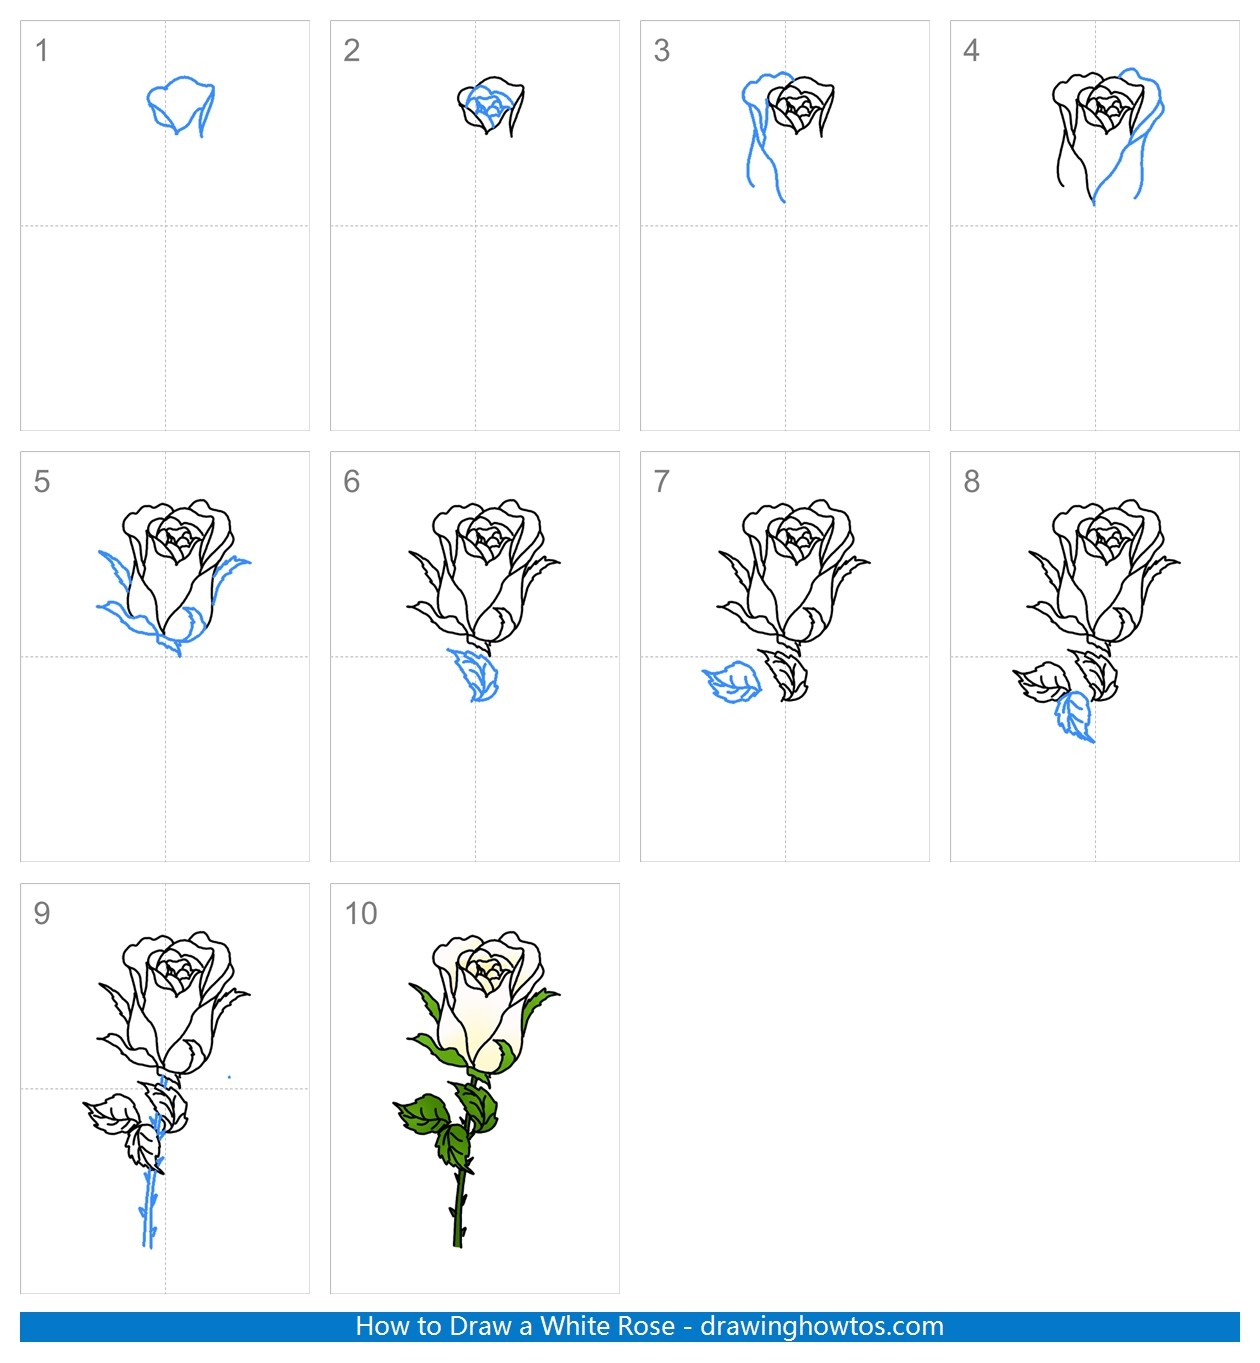 How to draw a White Rose Step by Step